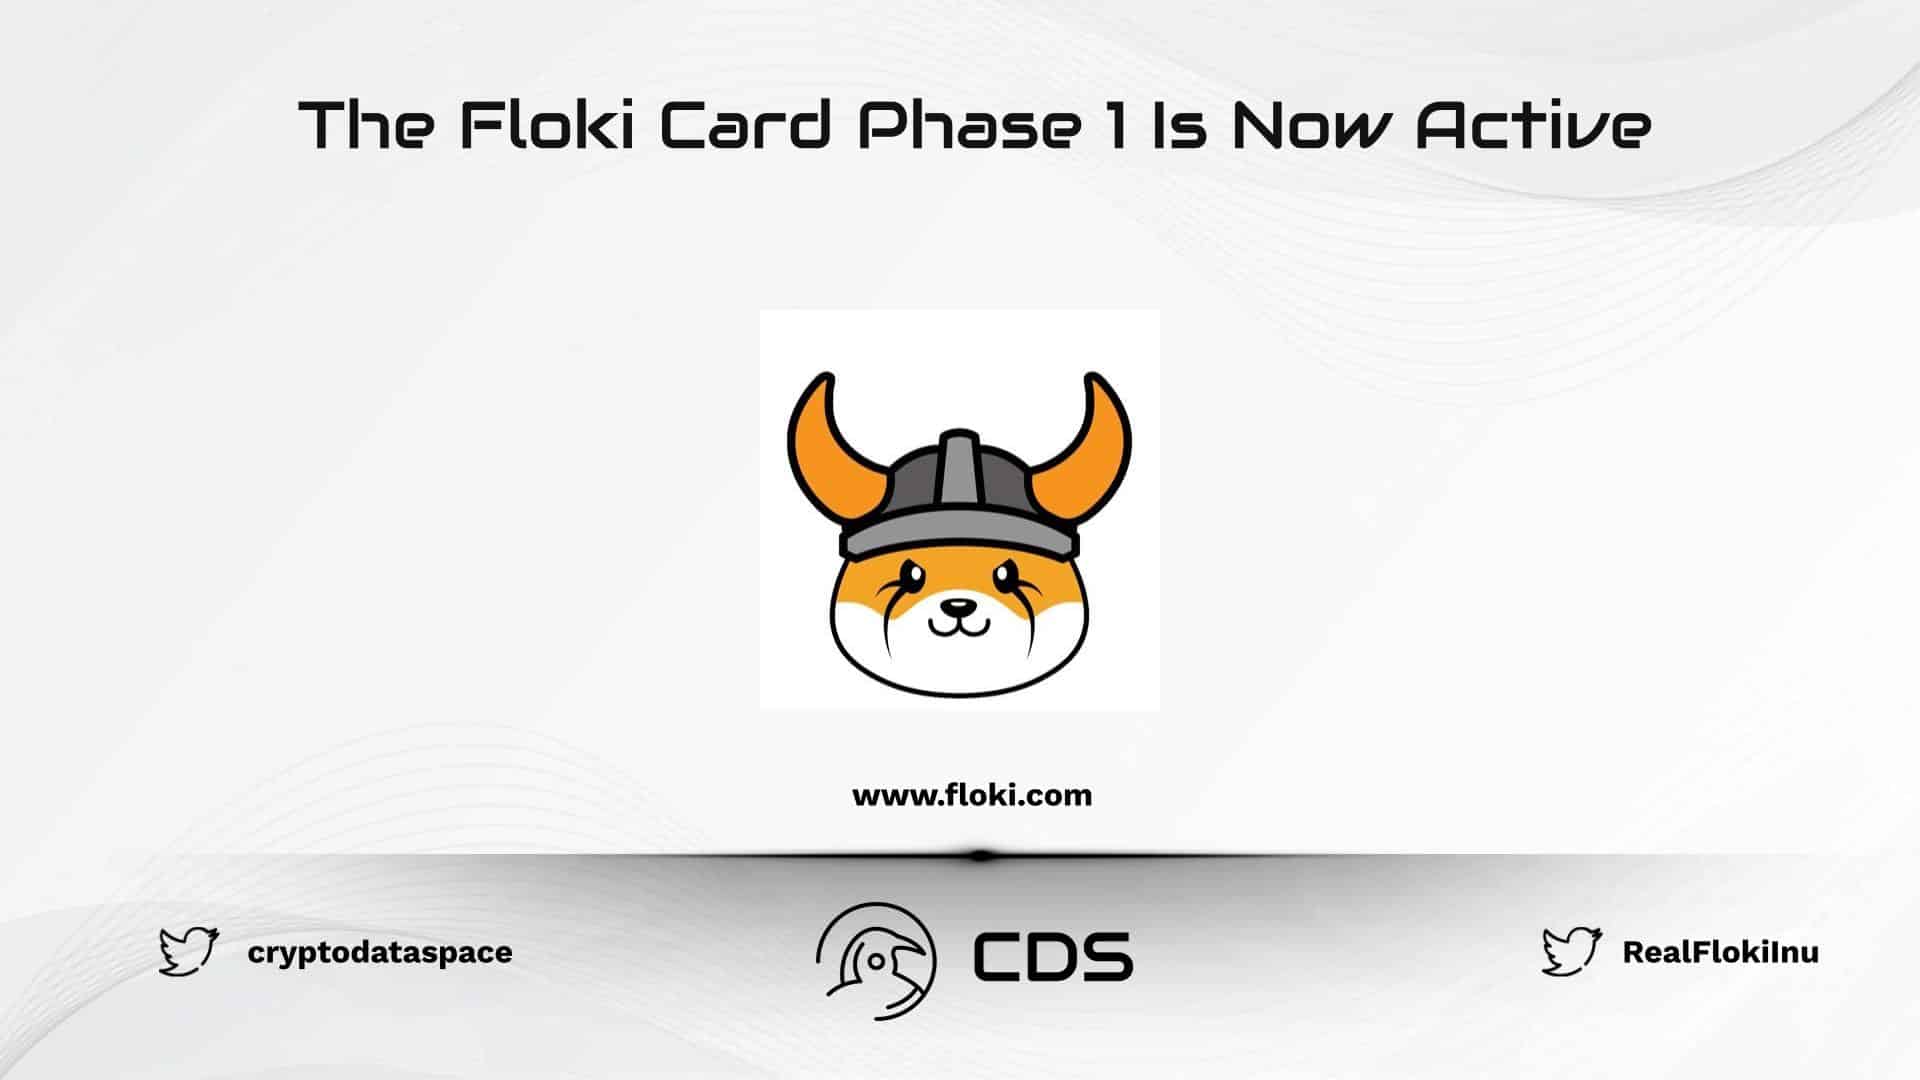 The Floki Card Phase 1 Is Now Active